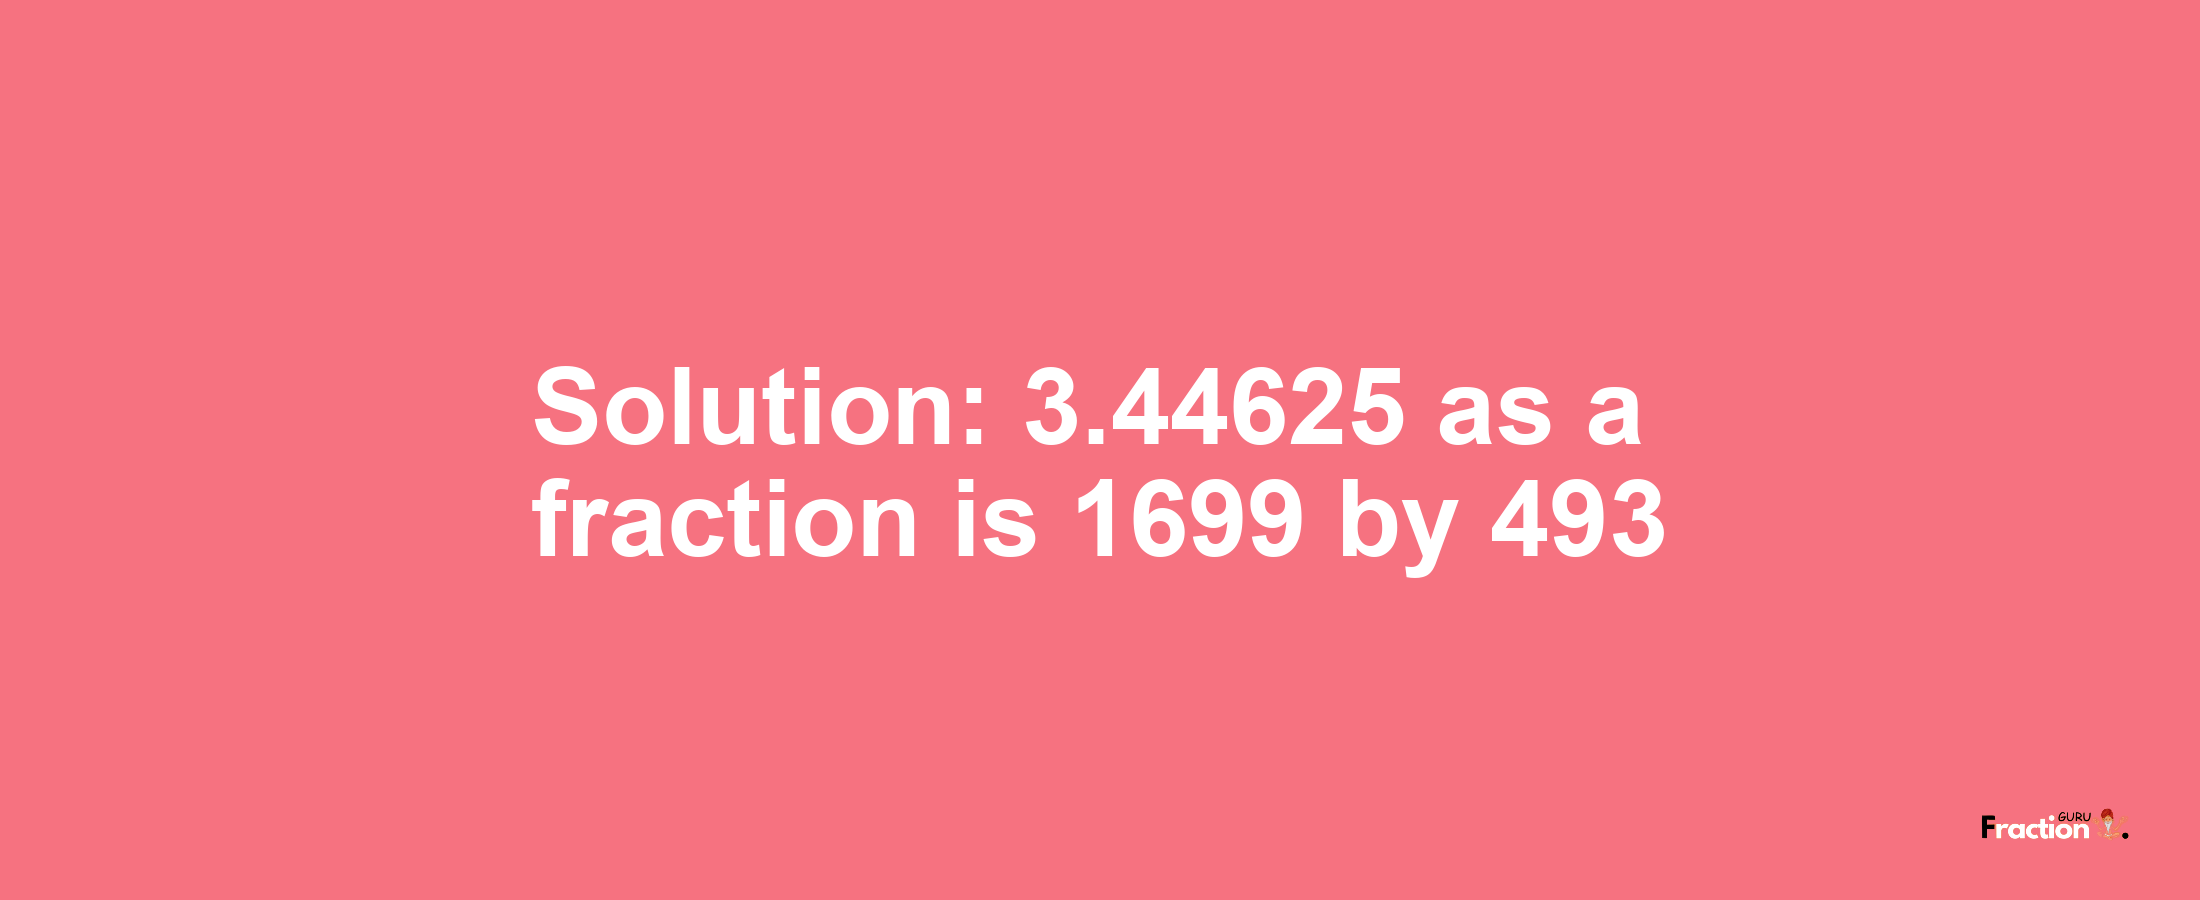 Solution:3.44625 as a fraction is 1699/493